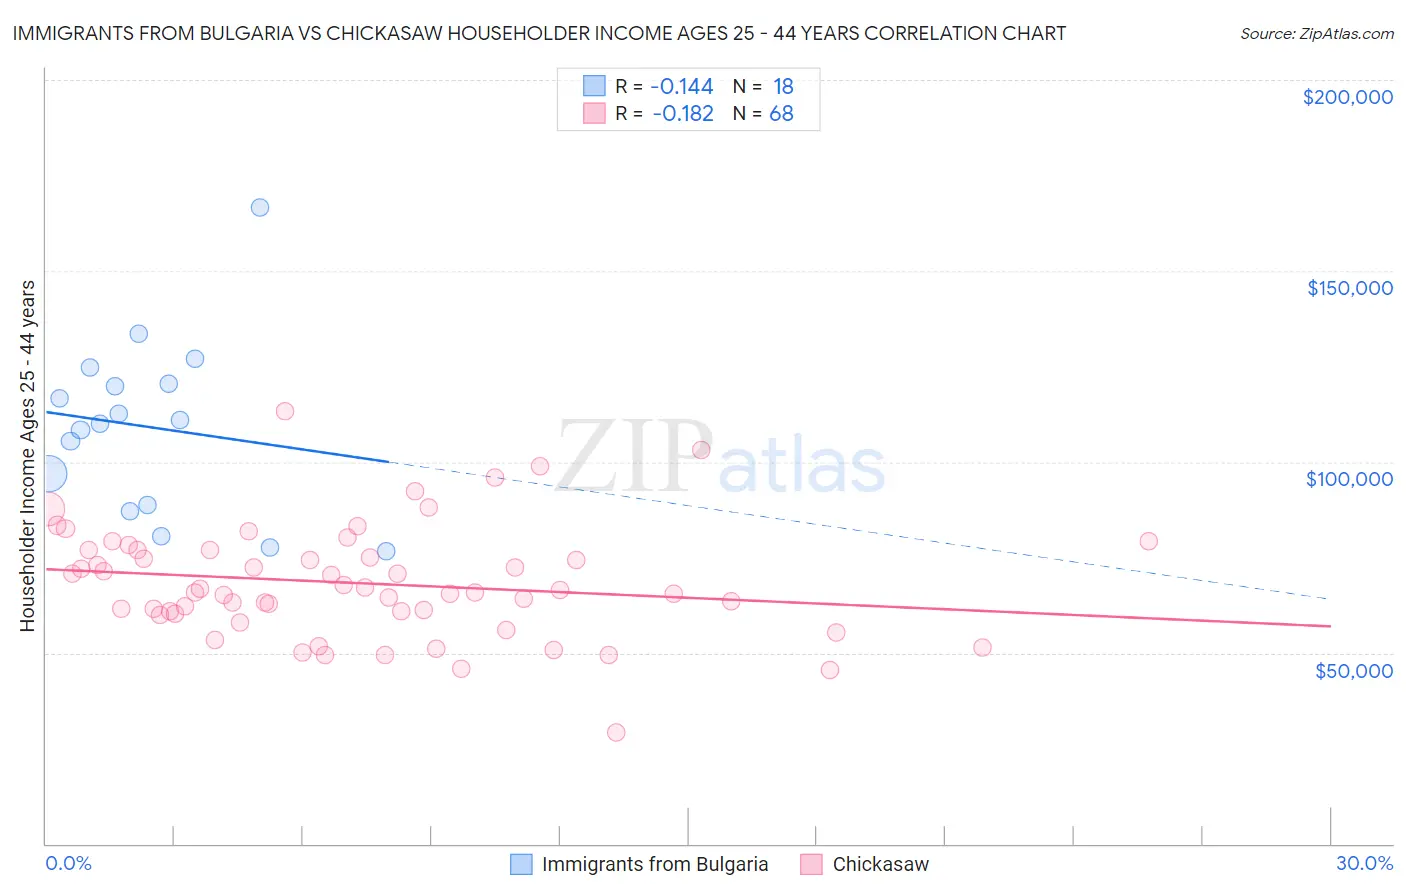 Immigrants from Bulgaria vs Chickasaw Householder Income Ages 25 - 44 years